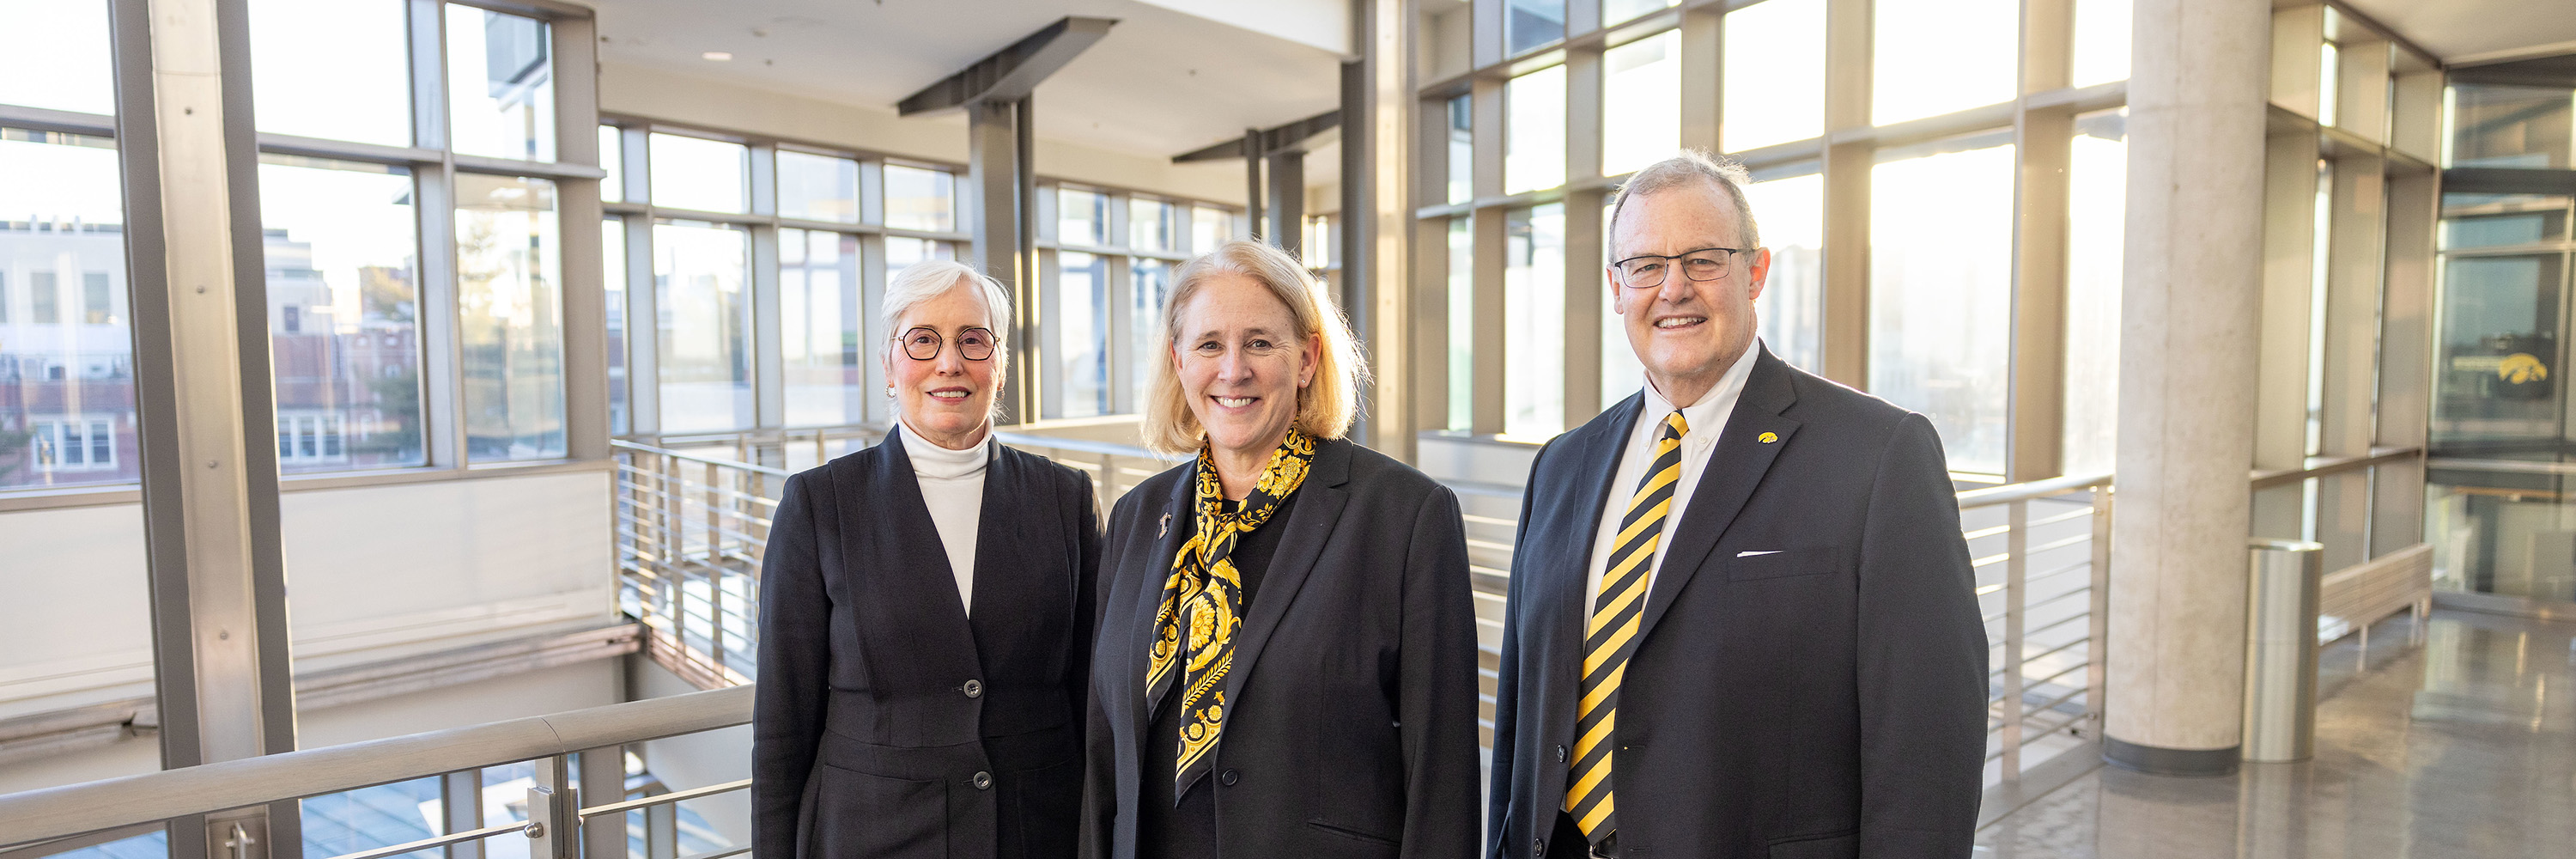 Honoring the Individuals Behind the Transformation of University of Iowa Health Care